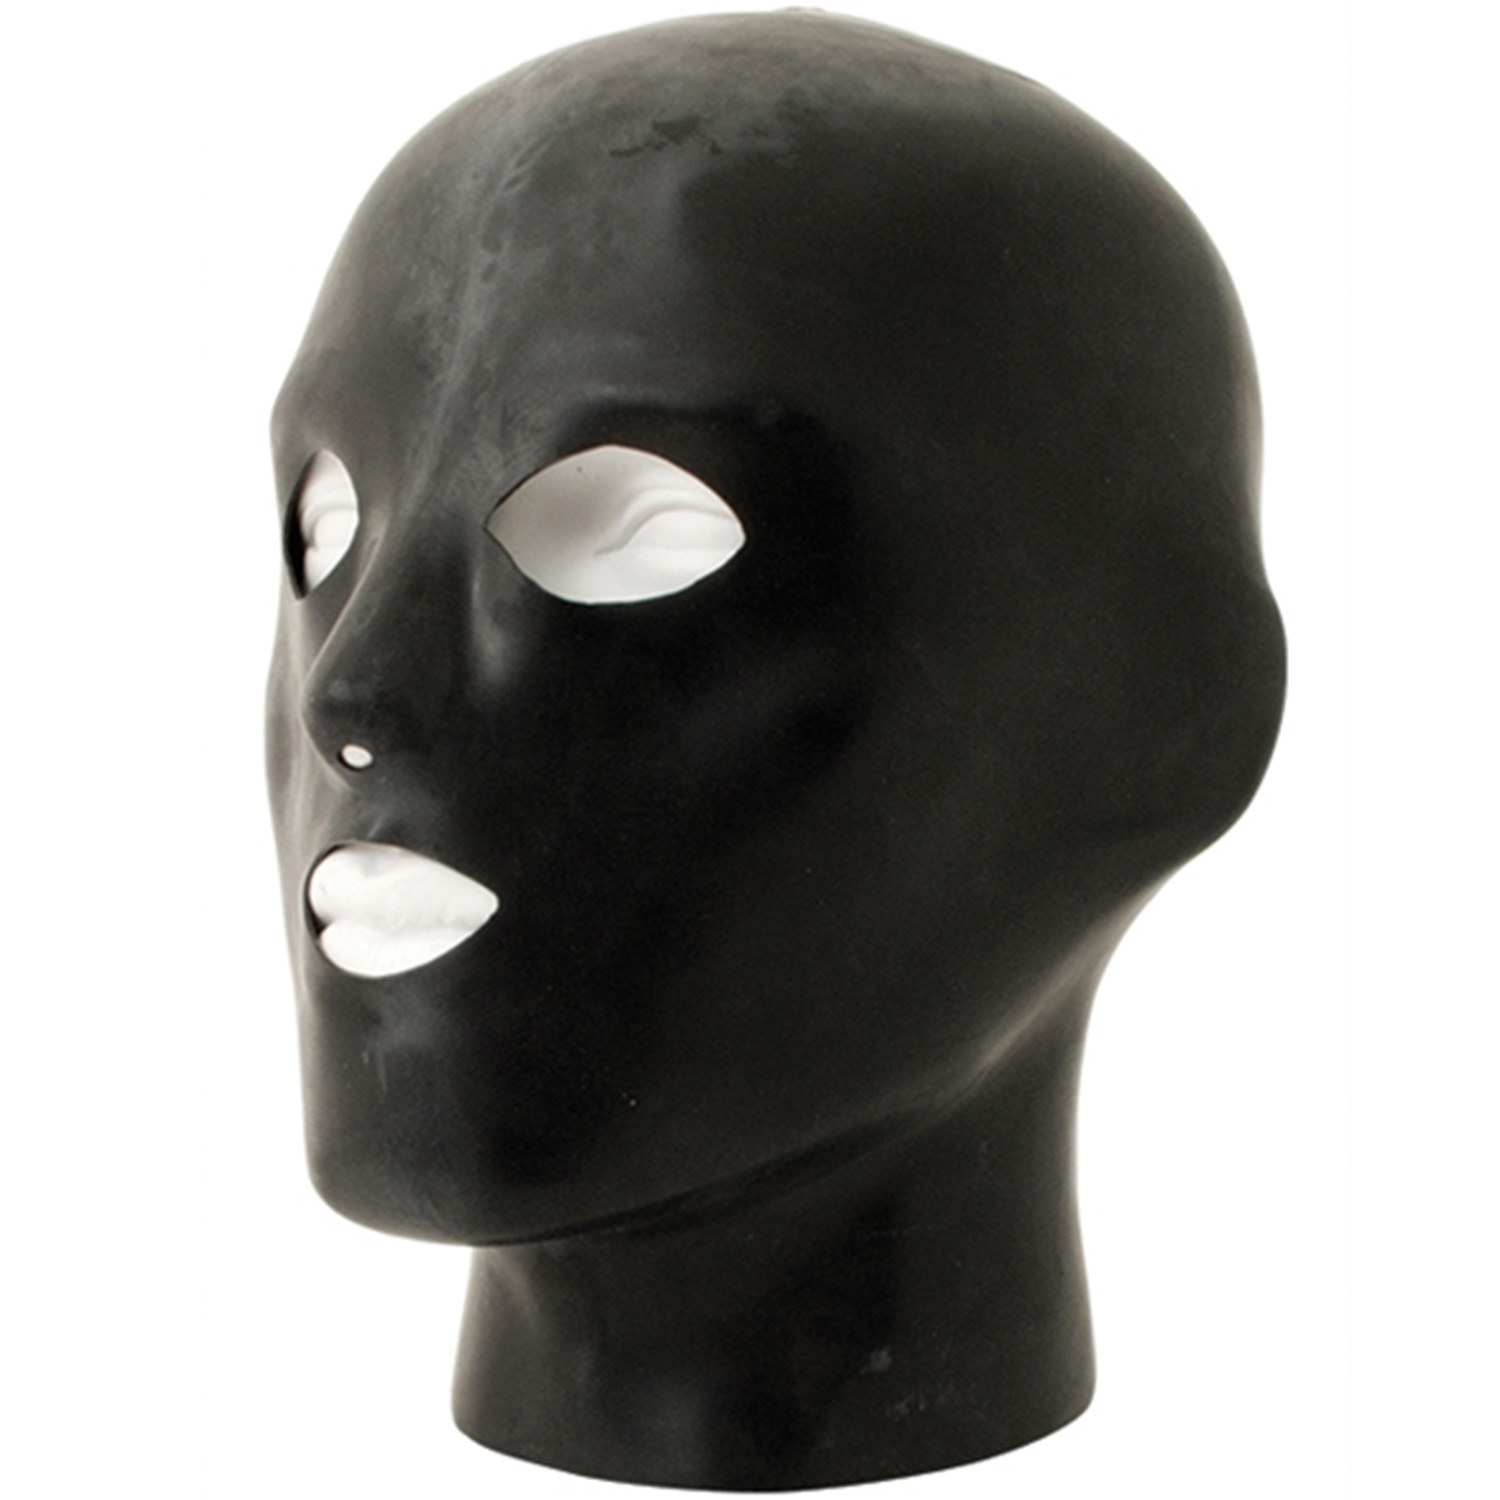 Mister B Rubber Heavy Duty Anatomical Hood With Holes - Sort - L/XL thumbnail